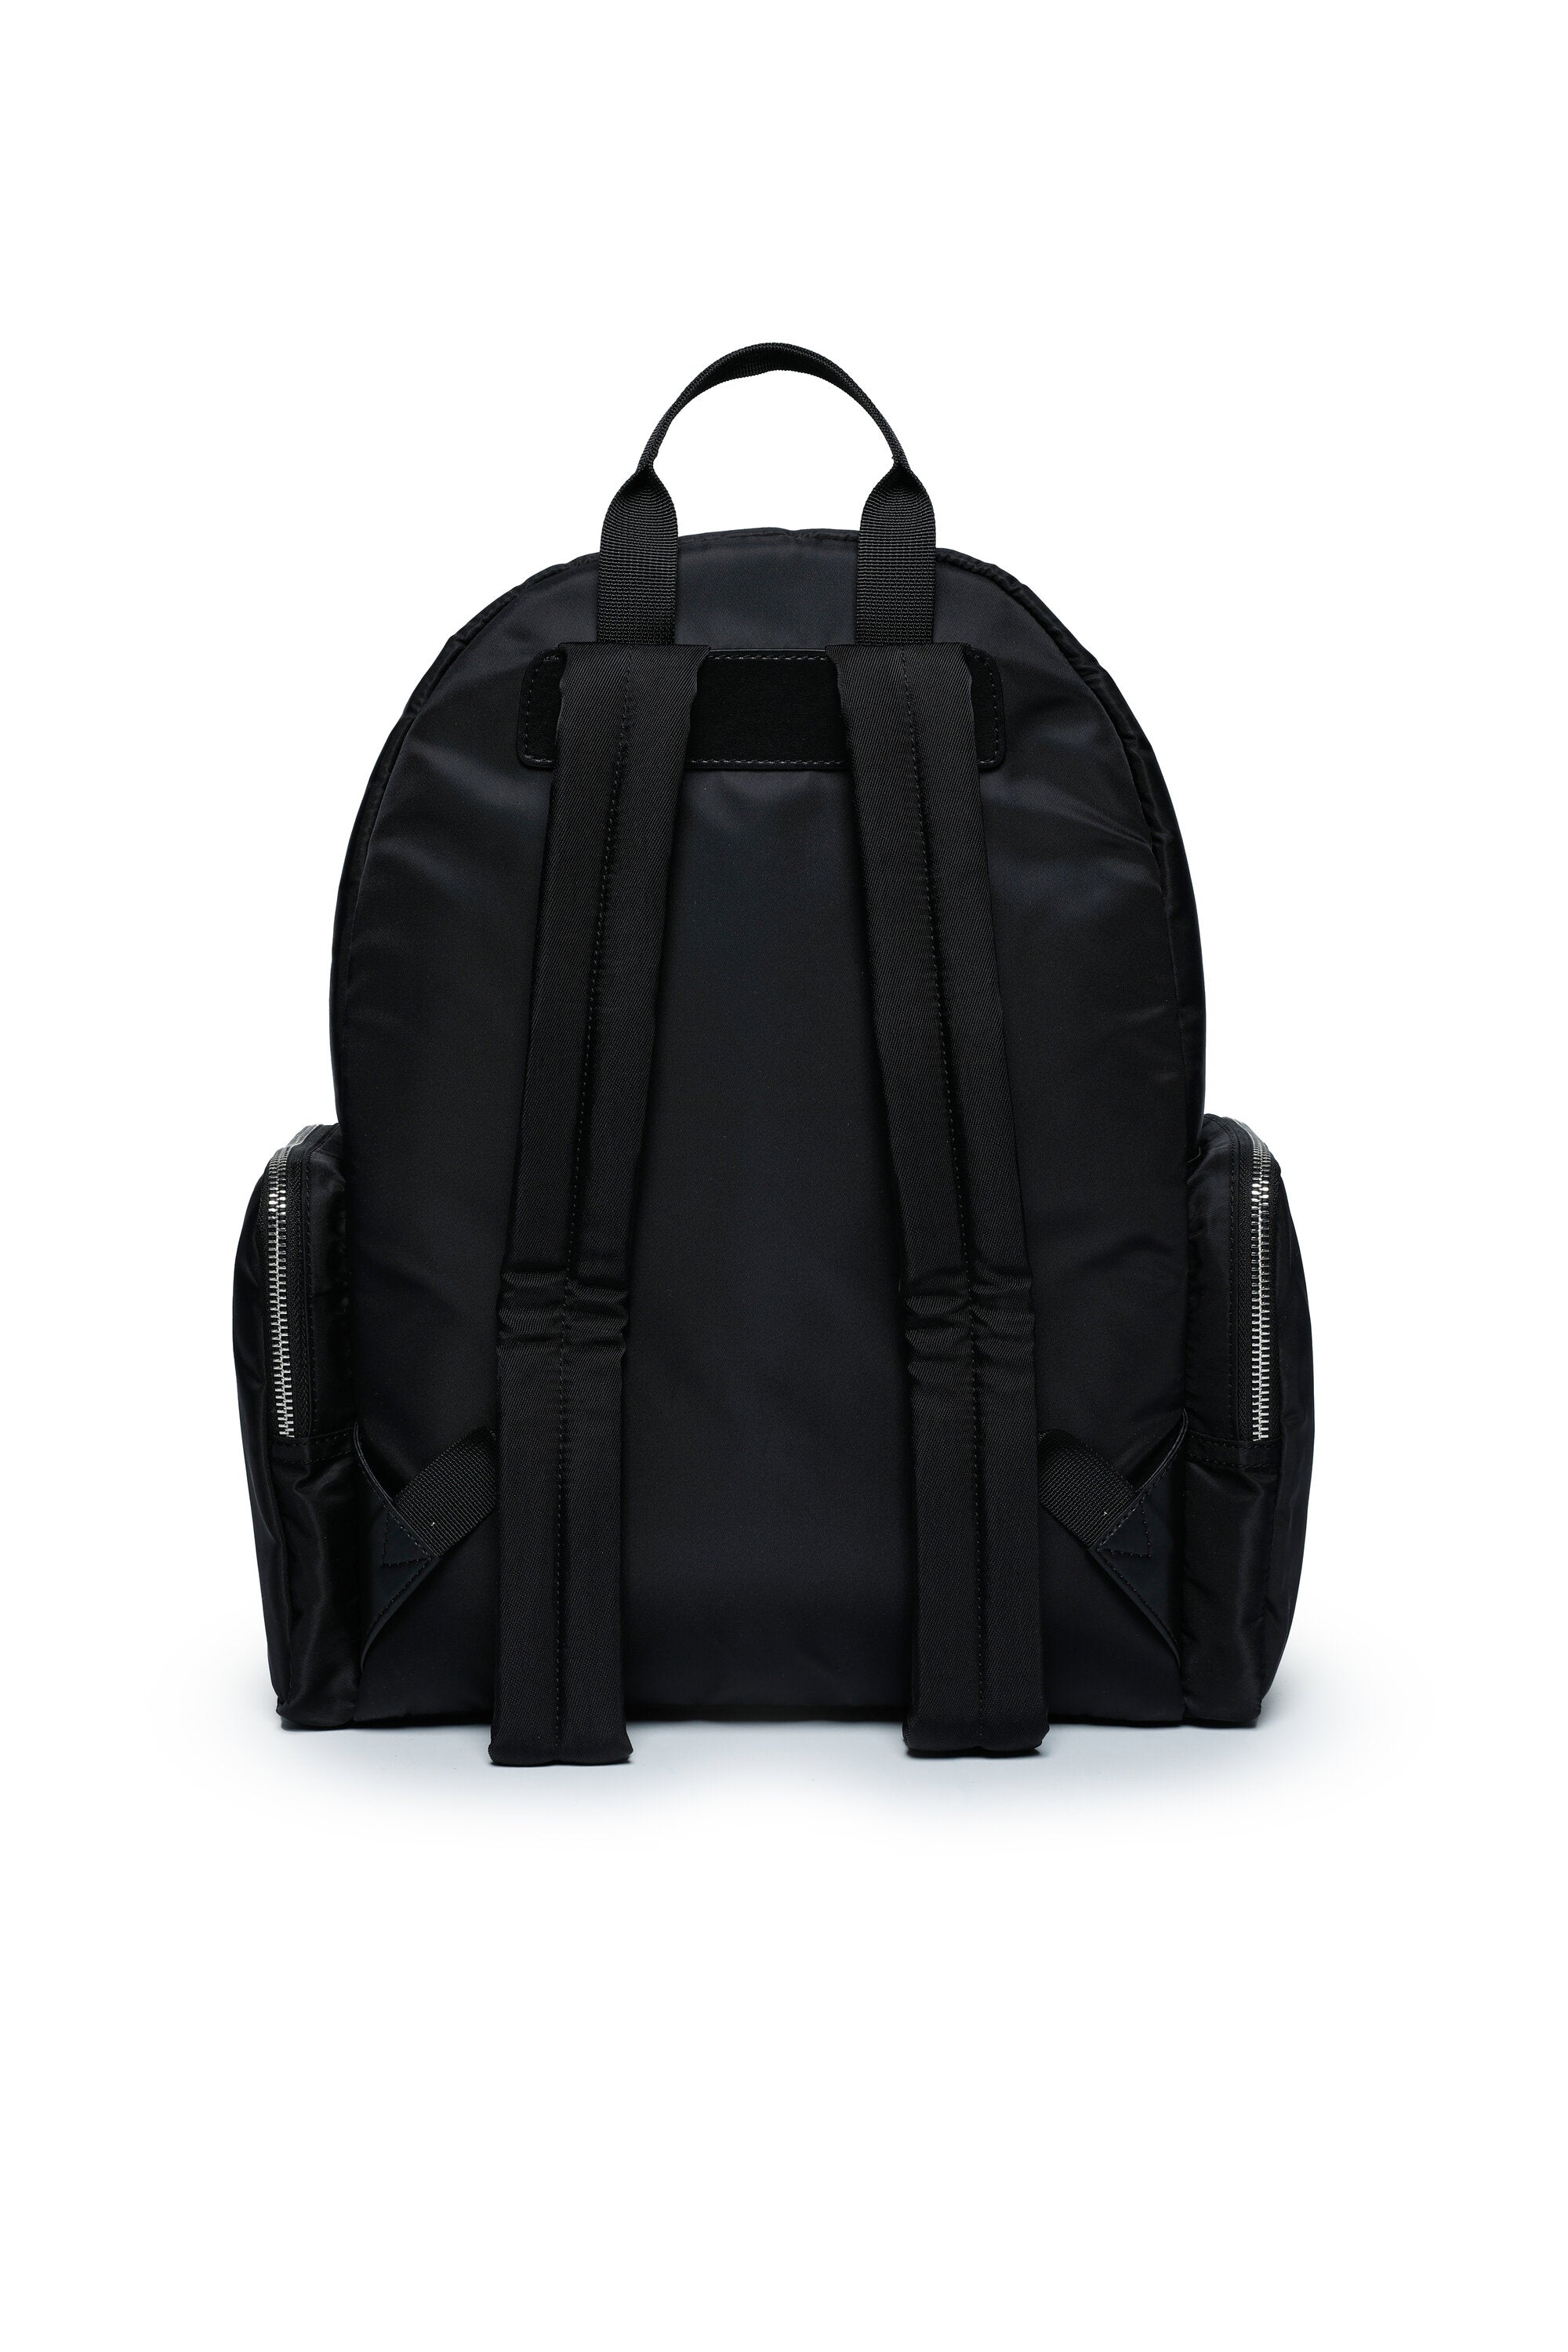 Backpack with side pockets and mirrored logo